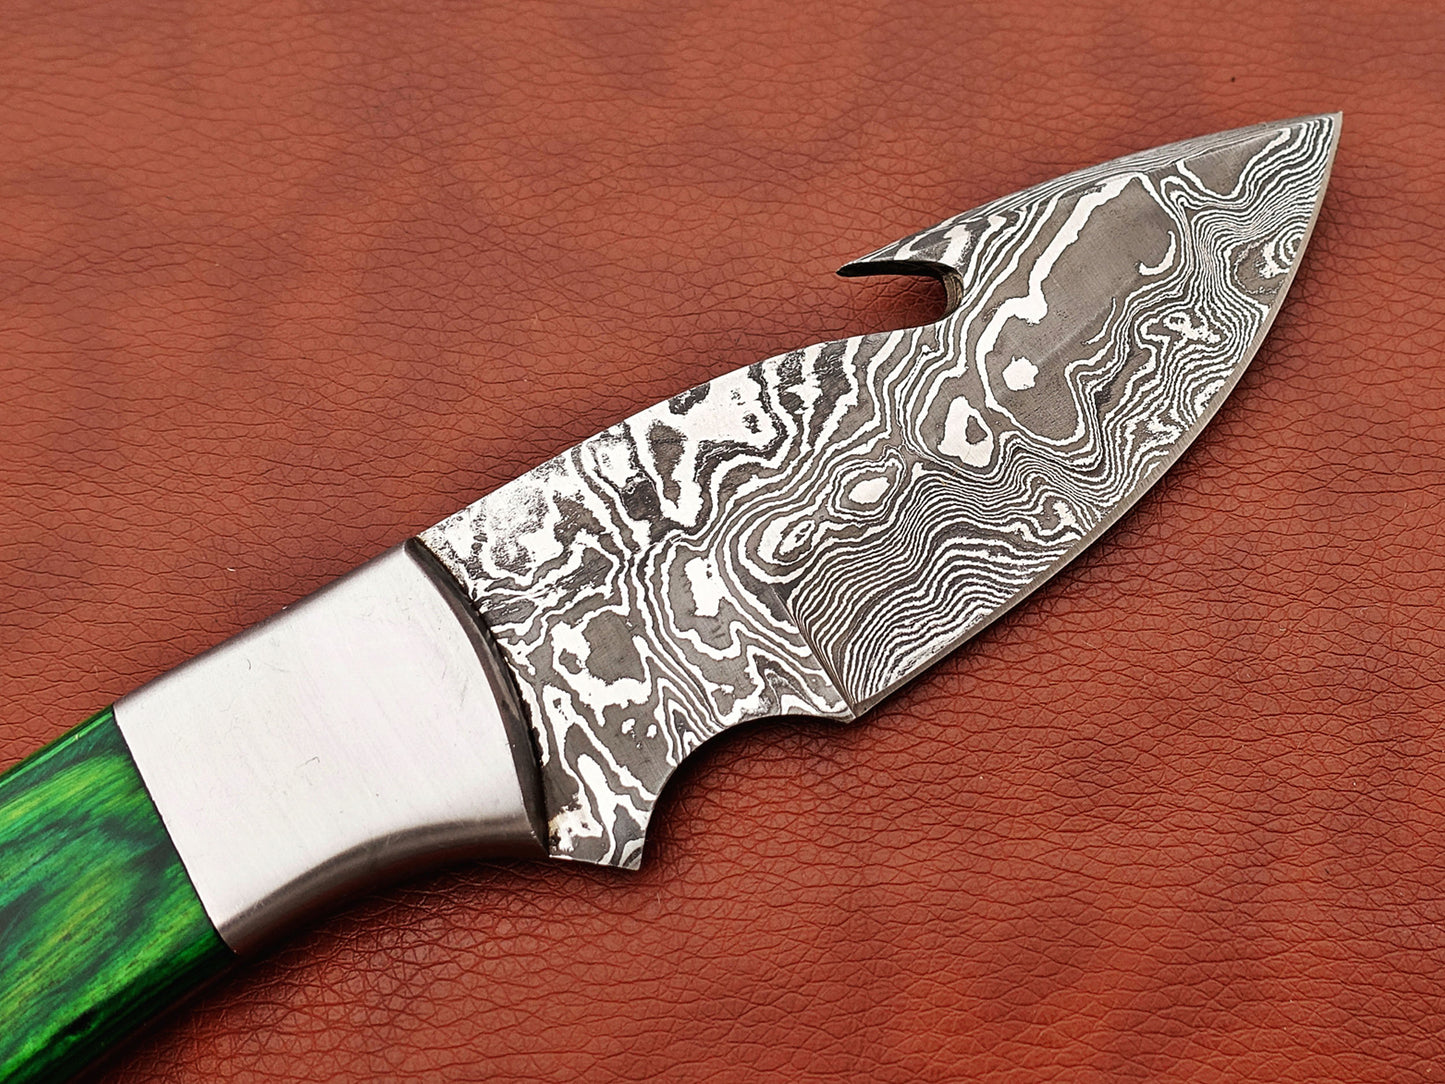 9.5" long Damascus steel Gut hook skinning knife, Full tang Rain drop pattern blade, available in 4 colors, includes Cow hide Leather sheath